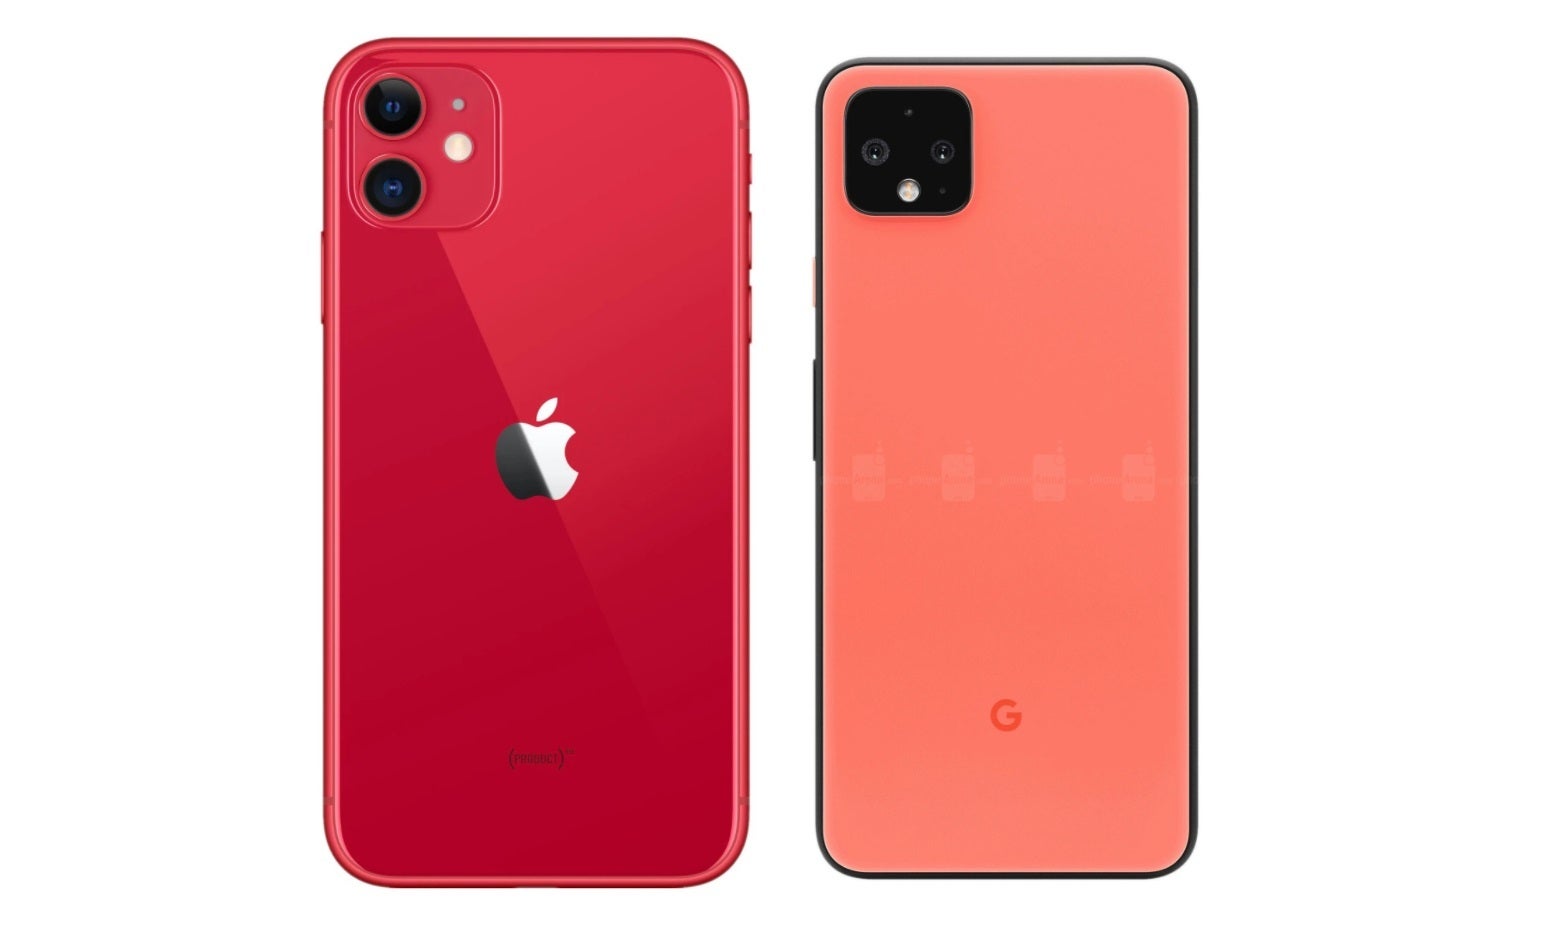 Left - iPhone 11, right - Pixel 4 - Is Google a leader or a follower? The Pixel 6 changes things